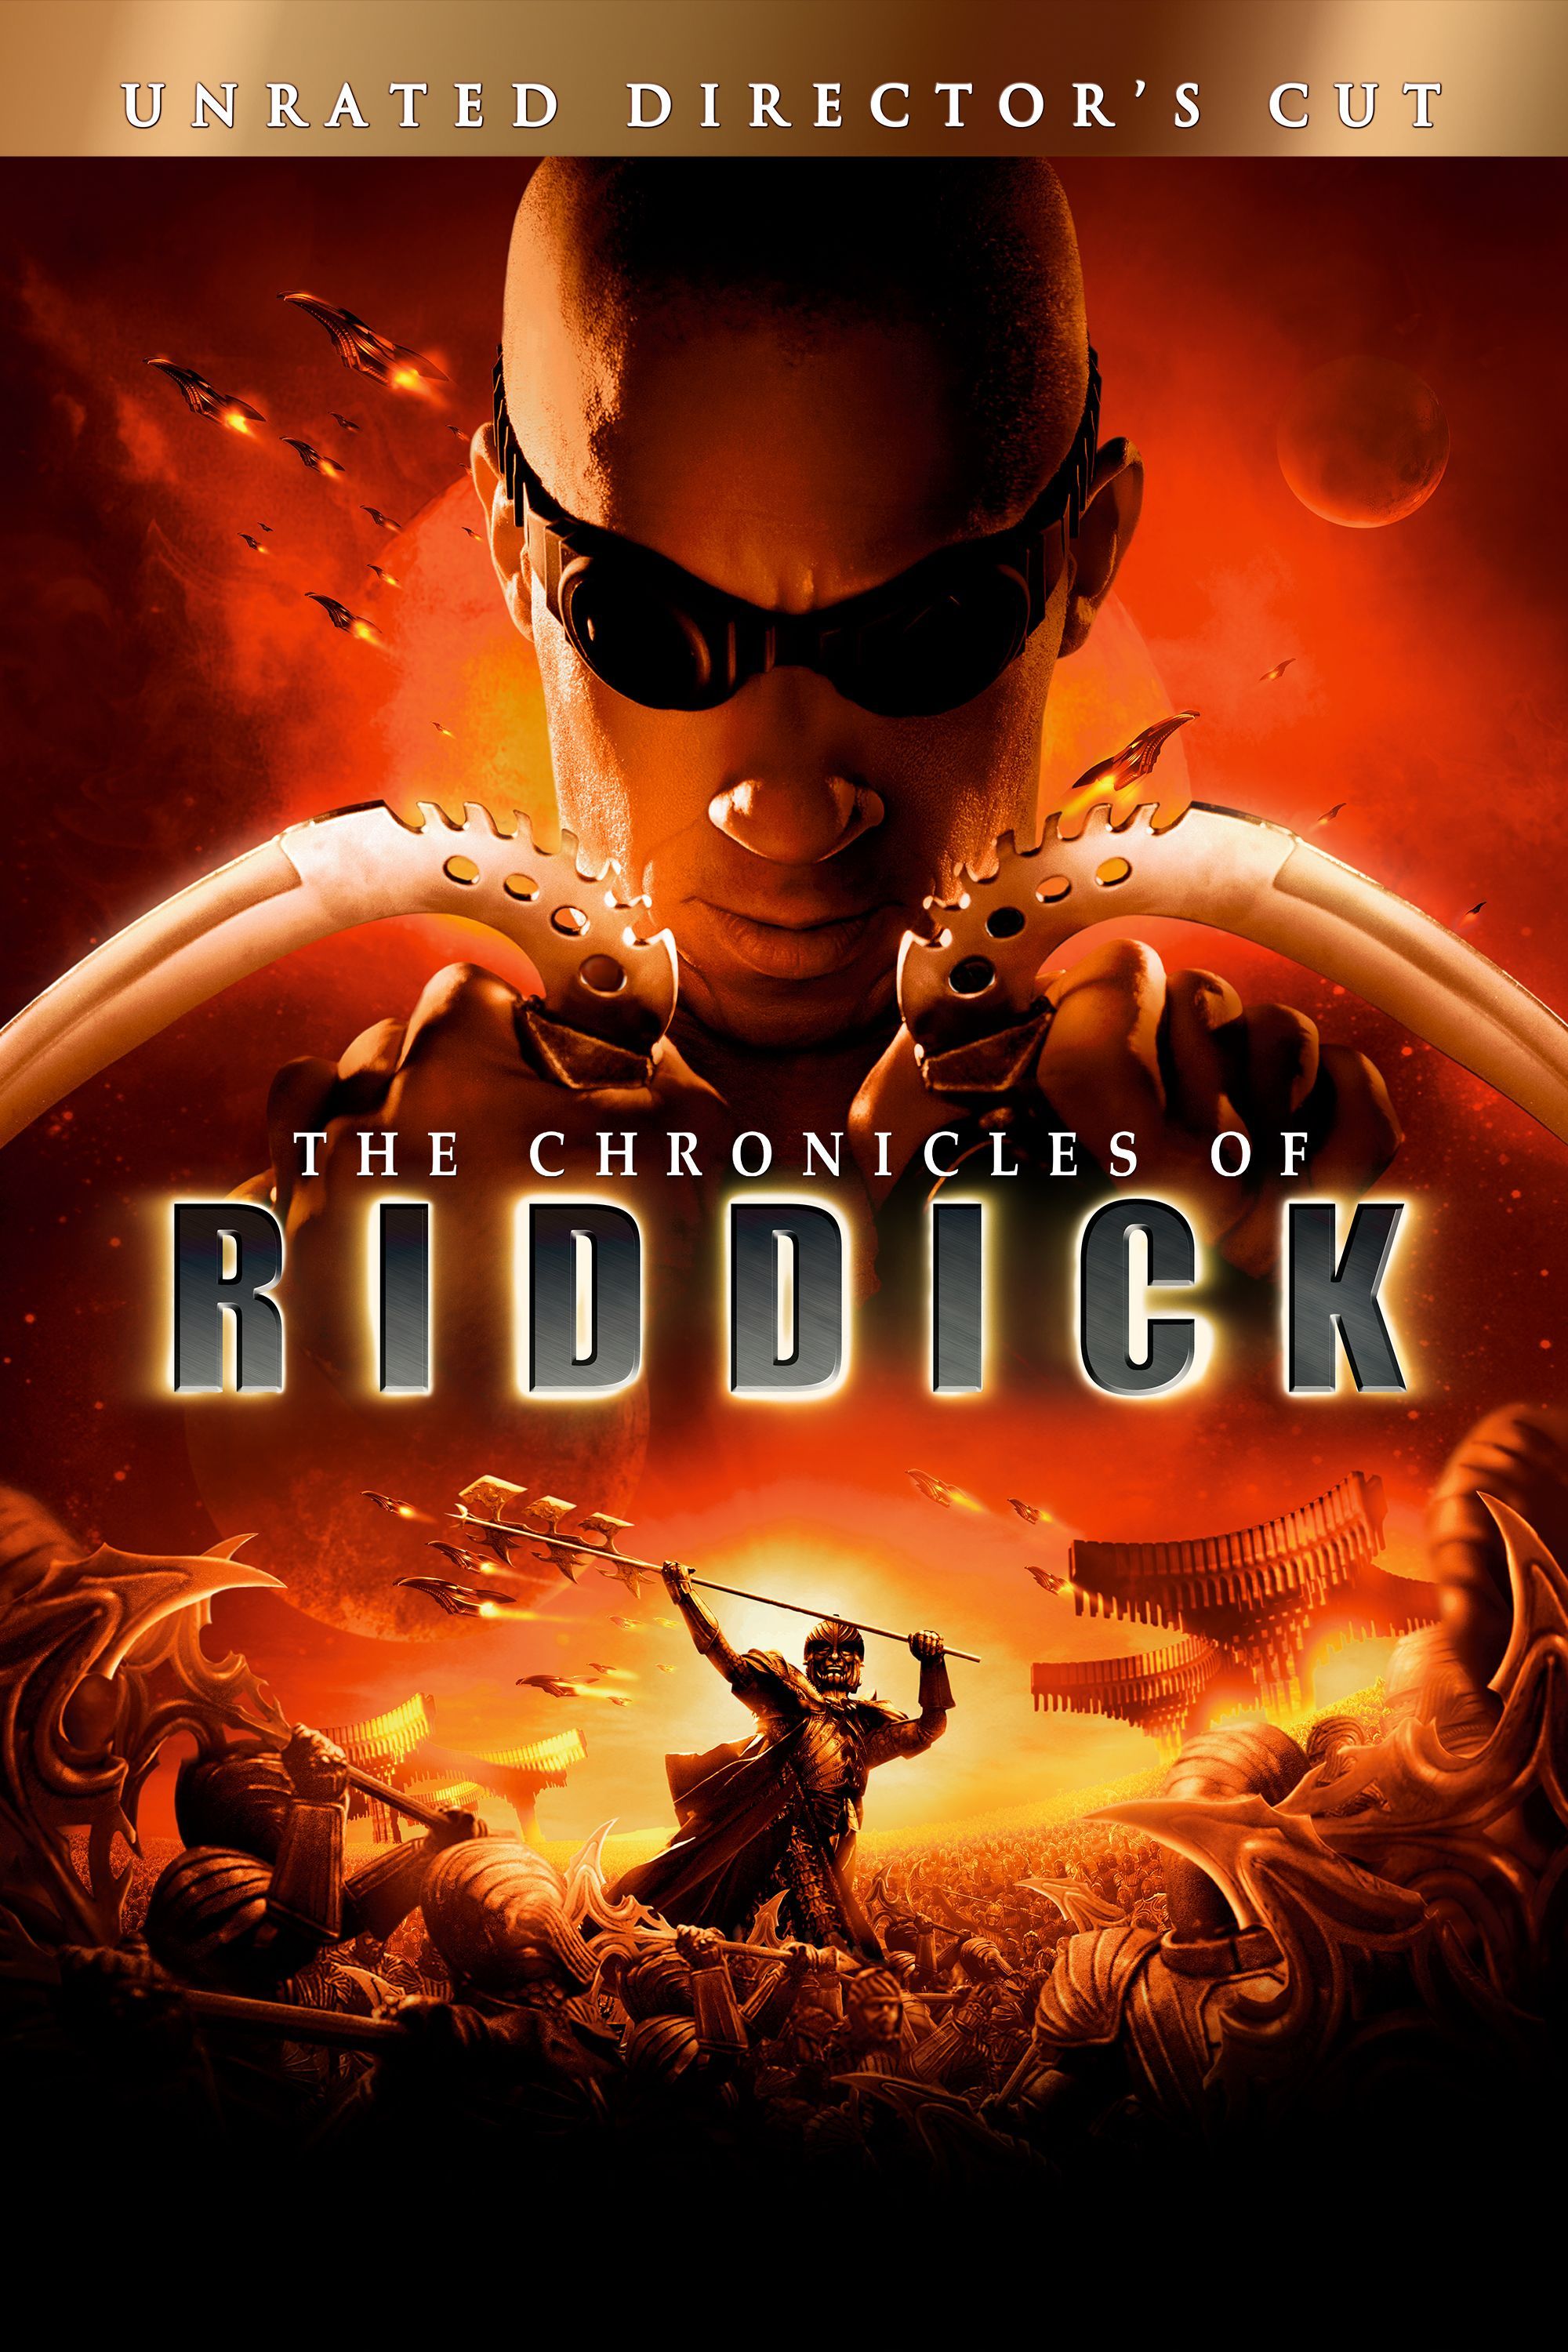 The Chronicles of Riddick Director's Cut